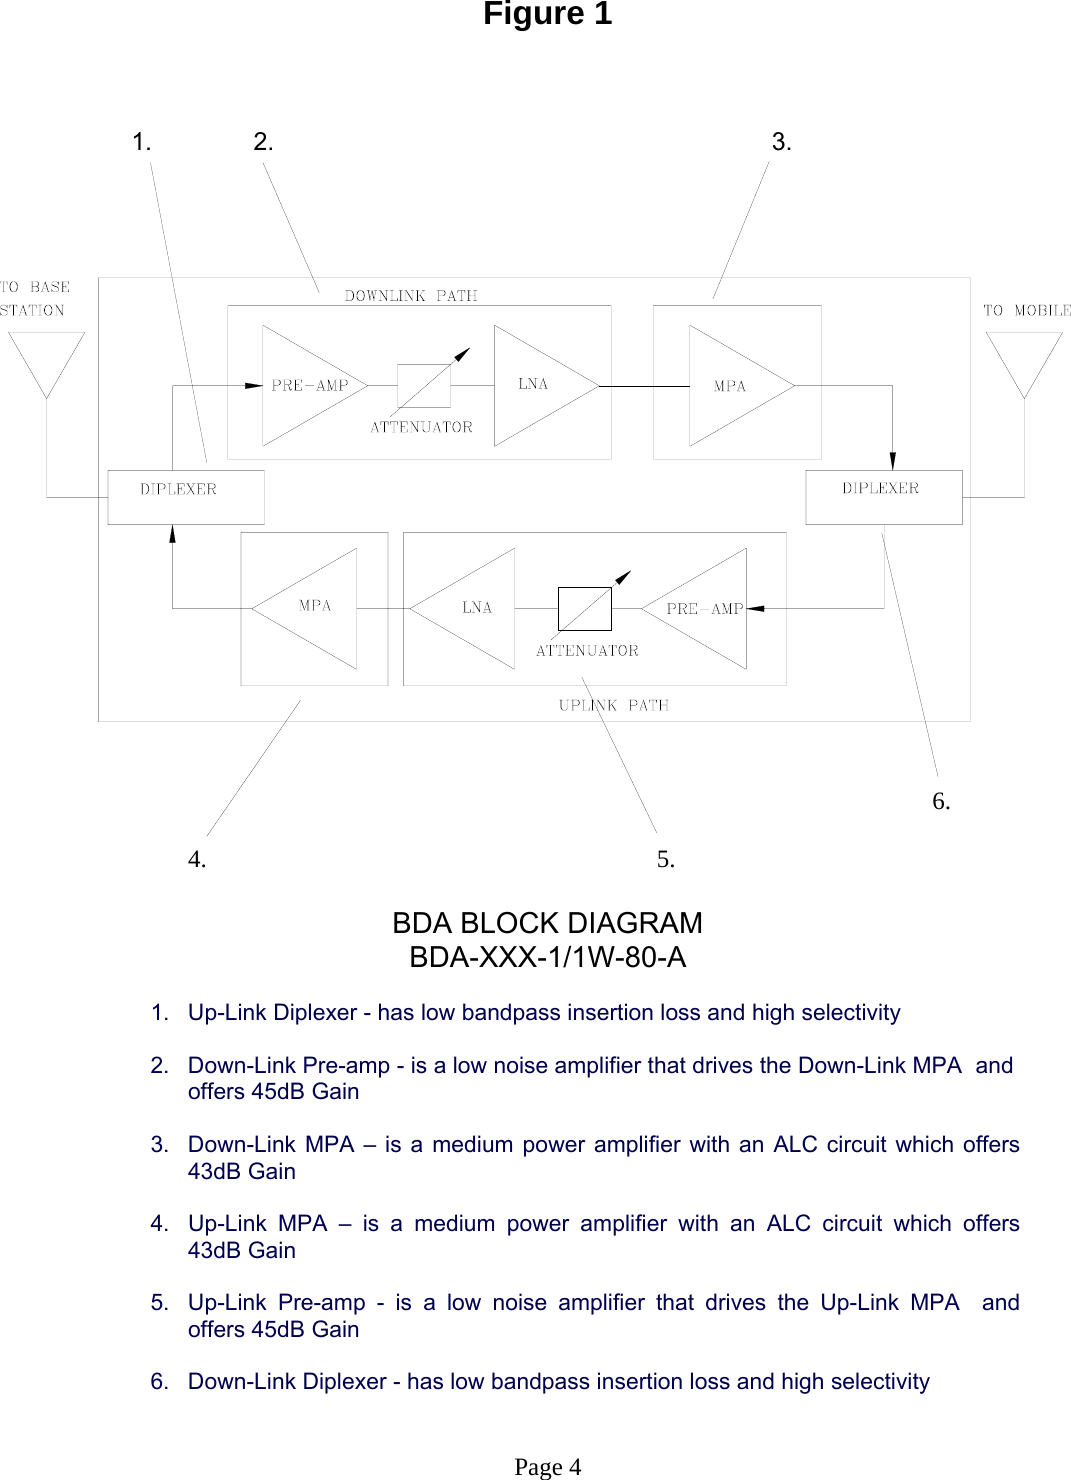 Figure 1             1.      2.                 3.                                   6.                              4.                     5.  BDA BLOCK DIAGRAM BDA-XXX-1/1W-80-A  1.  Up-Link Diplexer - has low bandpass insertion loss and high selectivity  2.  Down-Link Pre-amp - is a low noise amplifier that drives the Down-Link MPA  and   offers 45dB Gain  3.  Down-Link MPA – is a medium power amplifier with an ALC circuit which offers  43dB Gain  4.  Up-Link MPA – is a medium power amplifier with an ALC circuit which offers  43dB Gain  5.  Up-Link Pre-amp - is a low noise amplifier that drives the Up-Link MPA  and   offers 45dB Gain  6.  Down-Link Diplexer - has low bandpass insertion loss and high selectivity   Page 4 